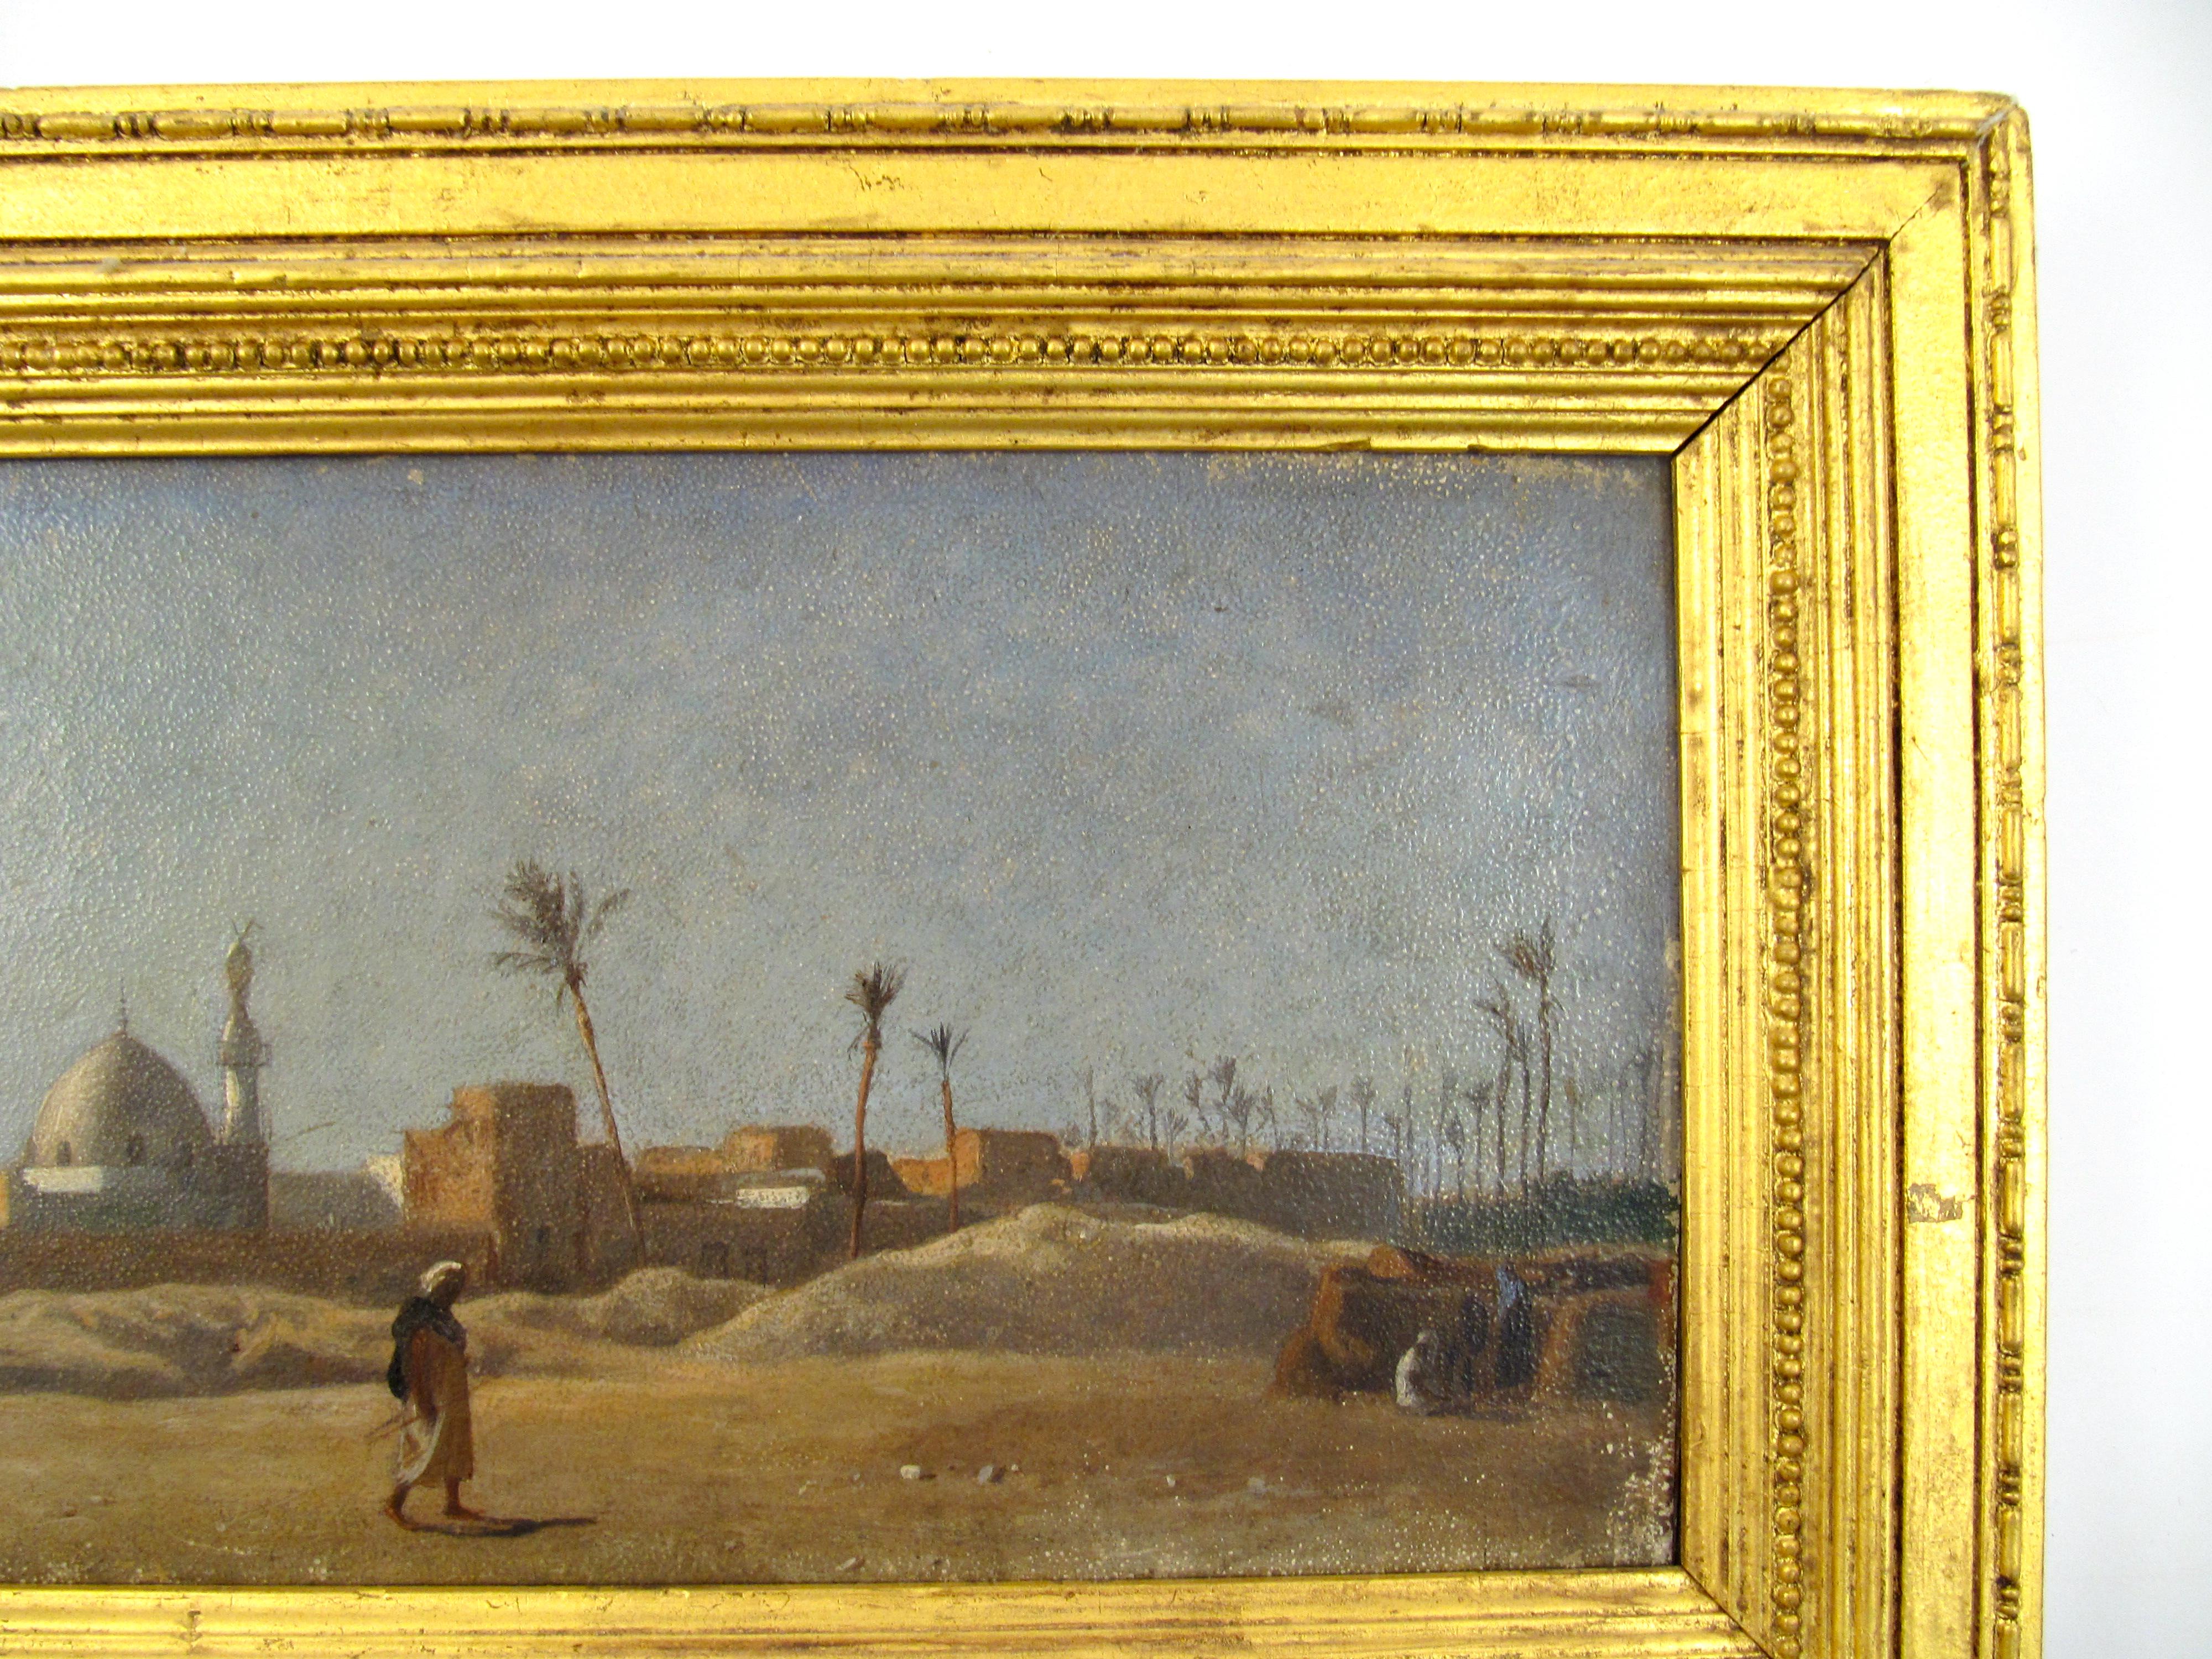 Frederick Goodall RA (English, 1822 - 1904)

A Desert Village with mosque at Midday in Egypt, North Africa

•	Oil on paper laid on canvas ca. 17 x 38 cm
•	Original frame ca. 27 x 47 cm
�•	Monogramed lower left

A small village dominated by a domed